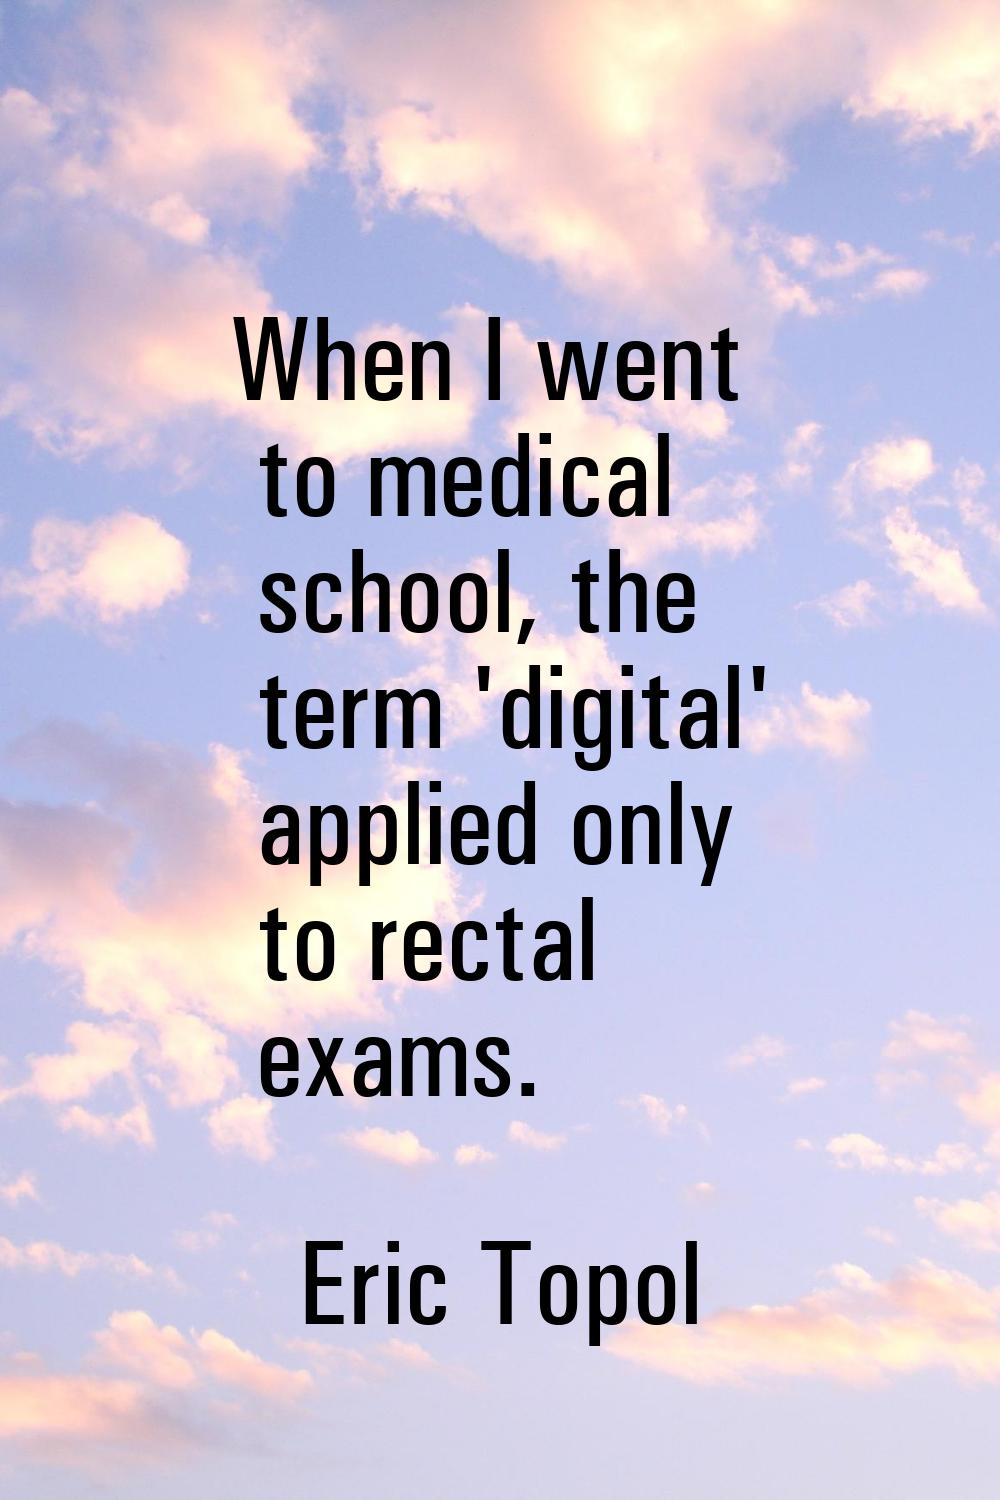 When I went to medical school, the term 'digital' applied only to rectal exams.